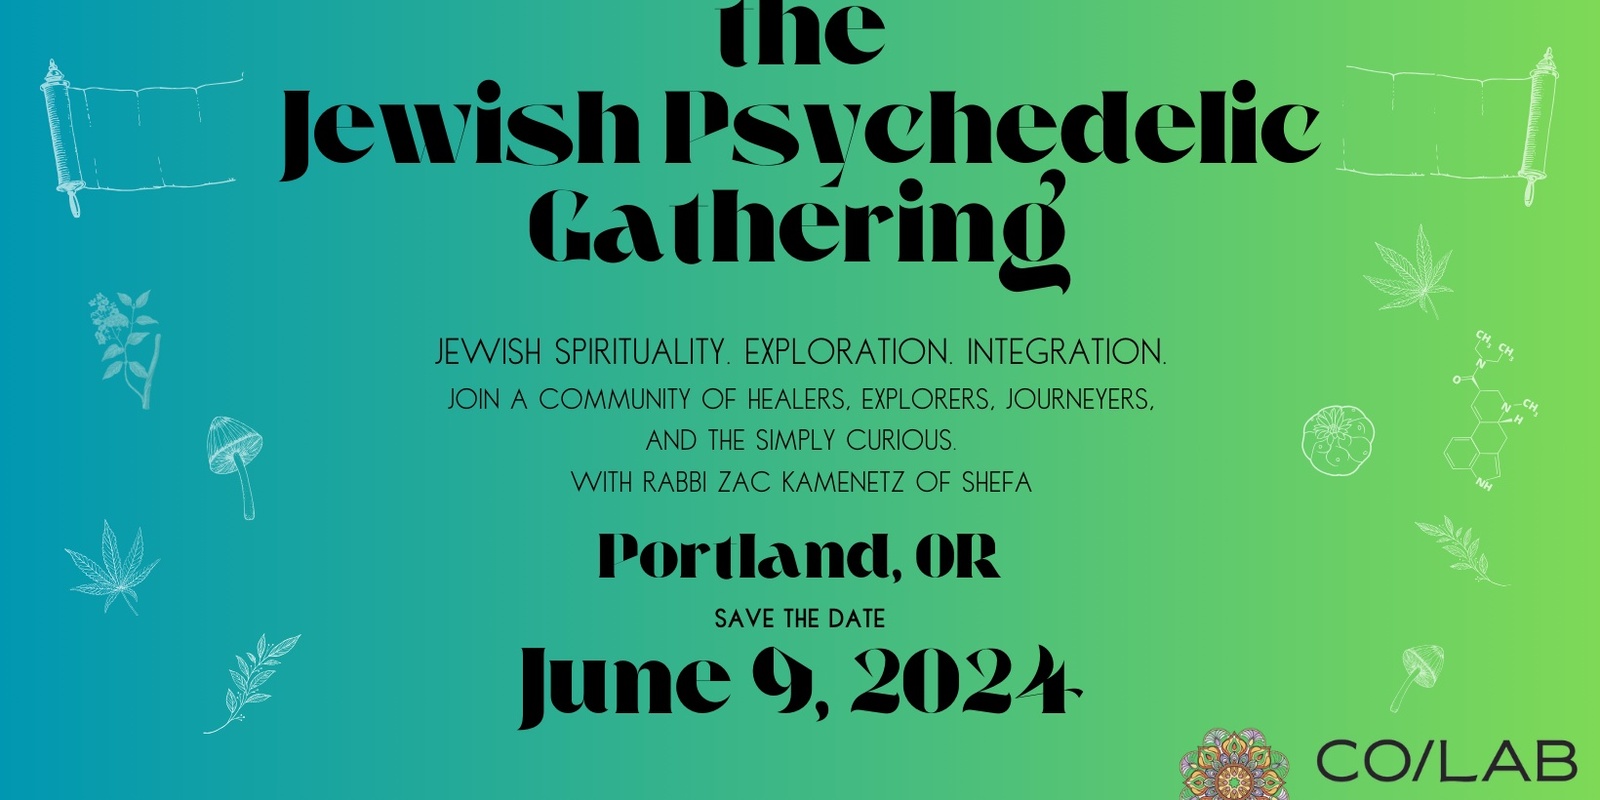 Banner image for The Jewish Psychedelic Gathering